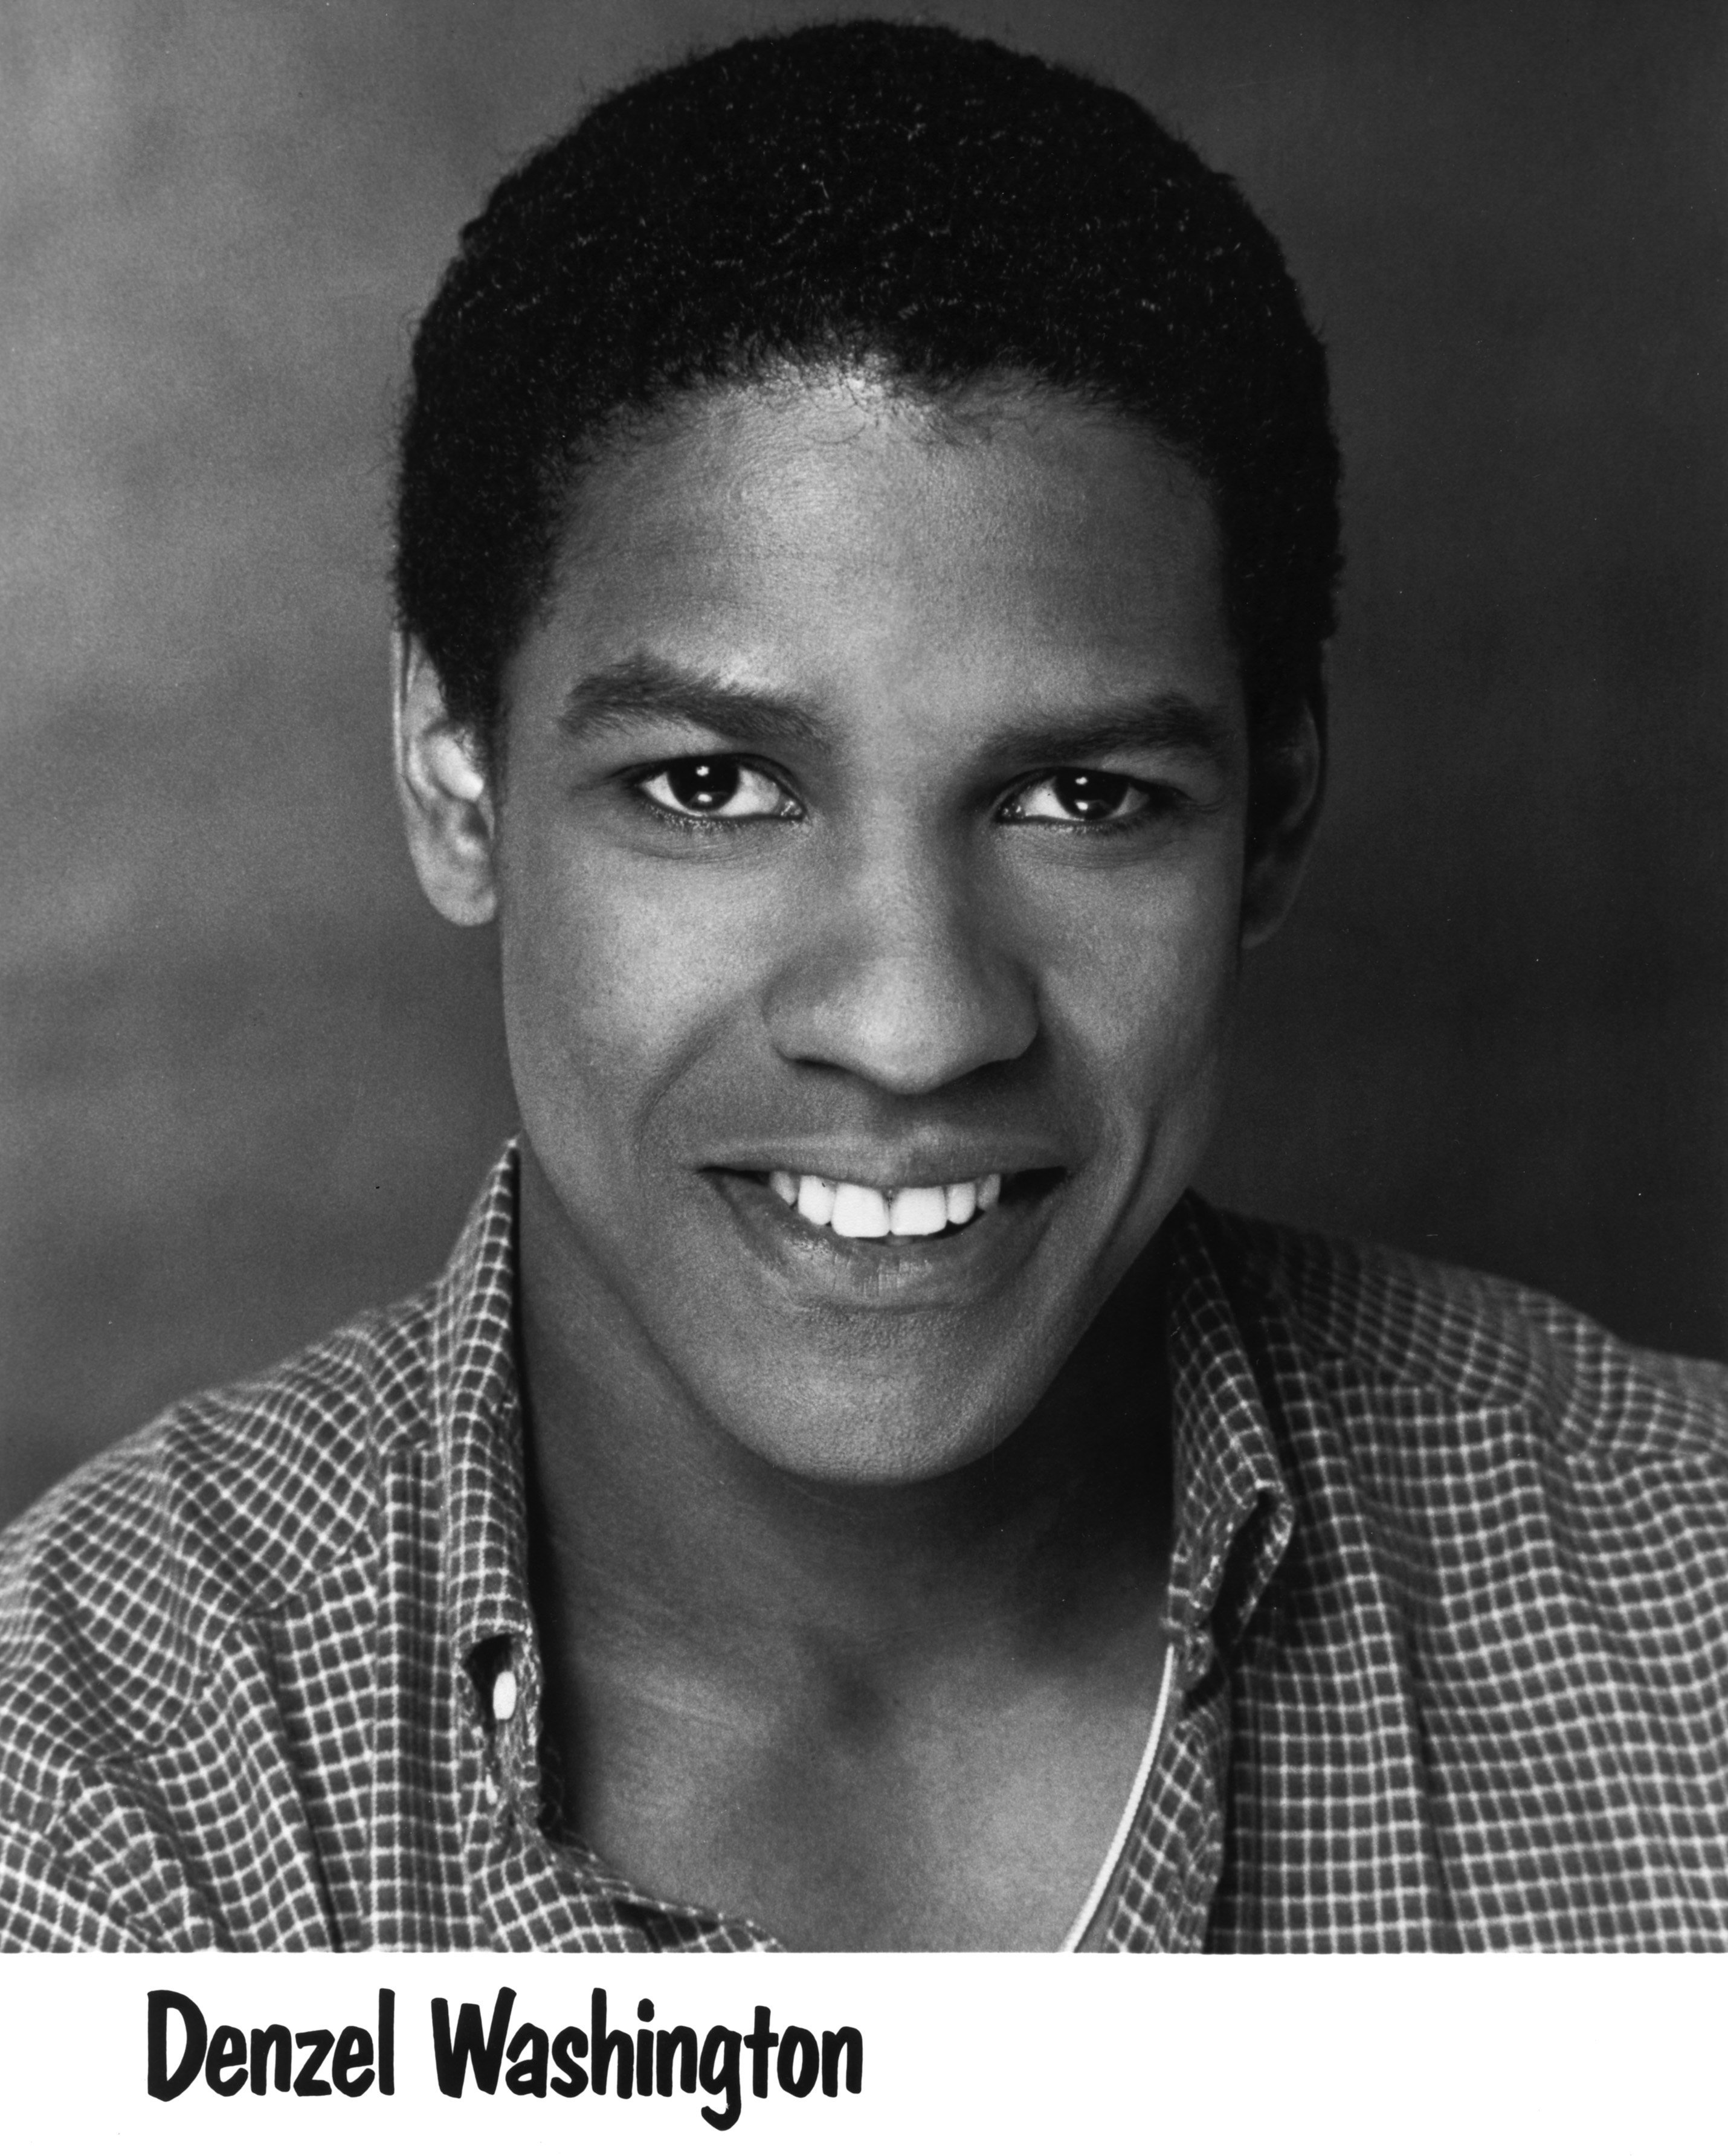 A photograph of Denzel Washington when he was younger. | Source: Getty Images